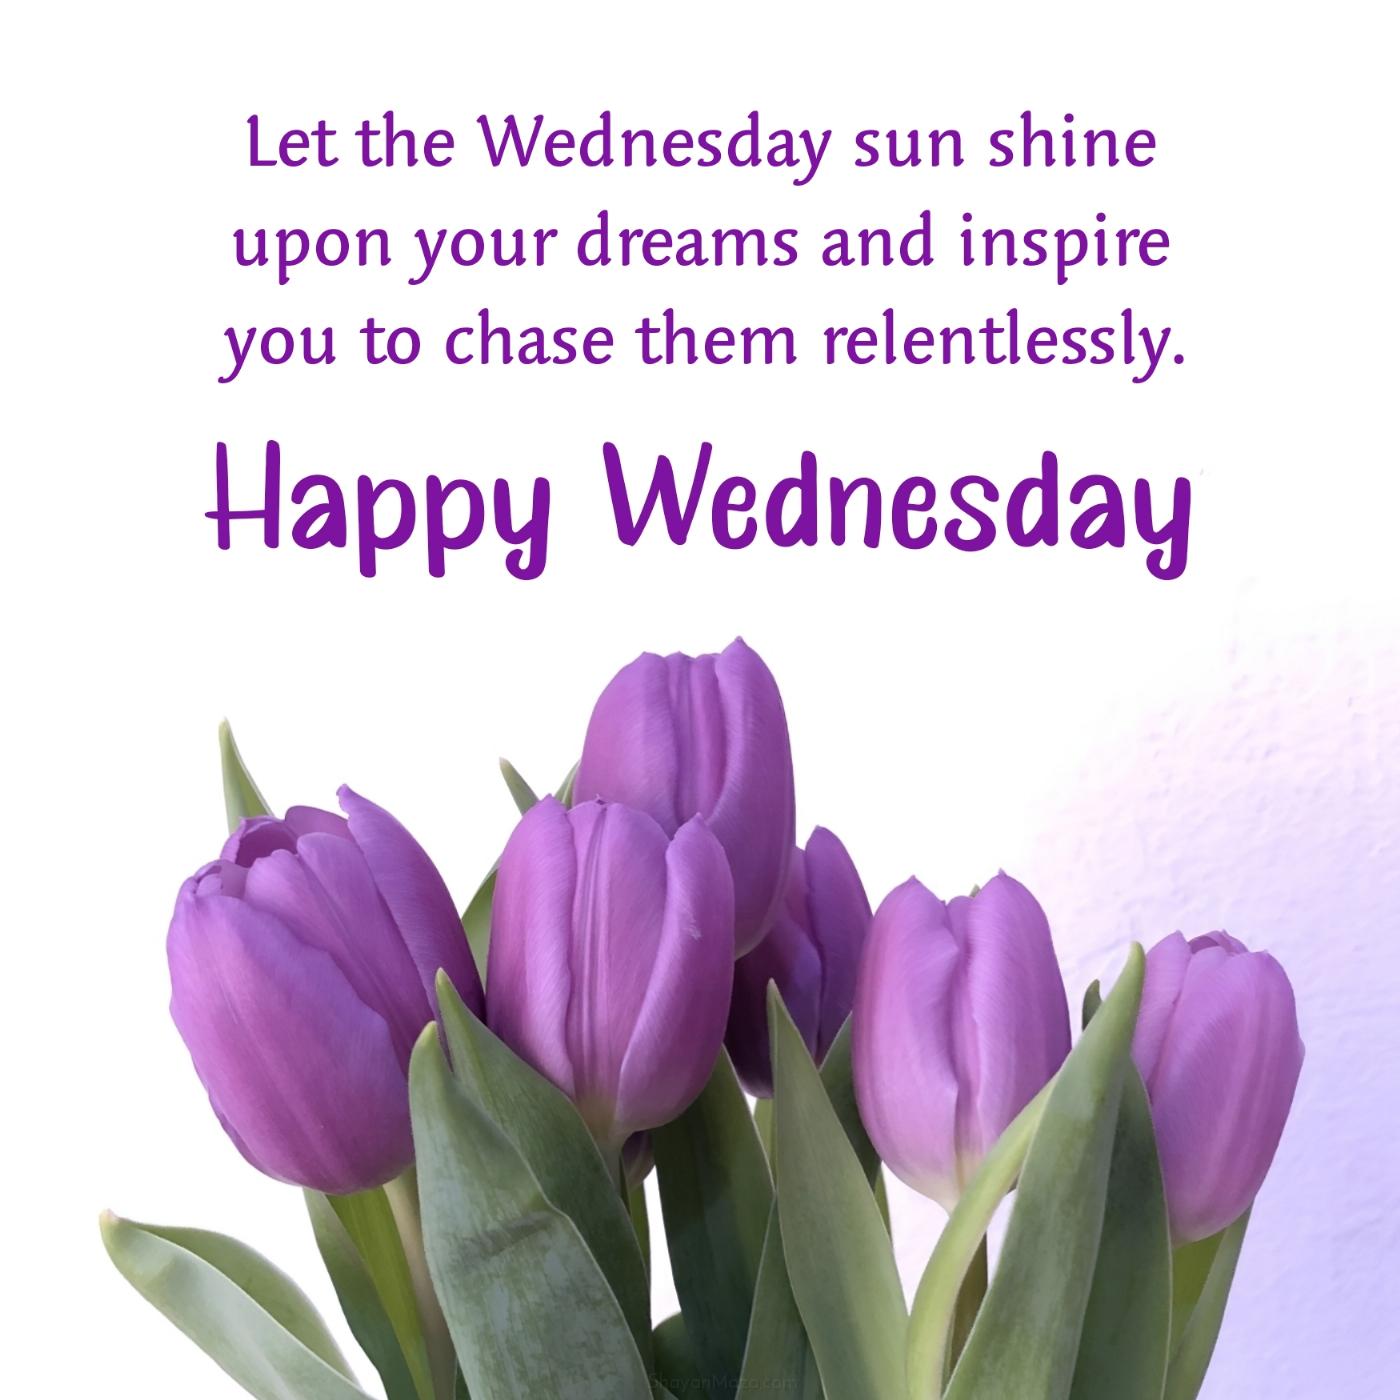 Let the Wednesday sun shine upon your dreams and inspire you